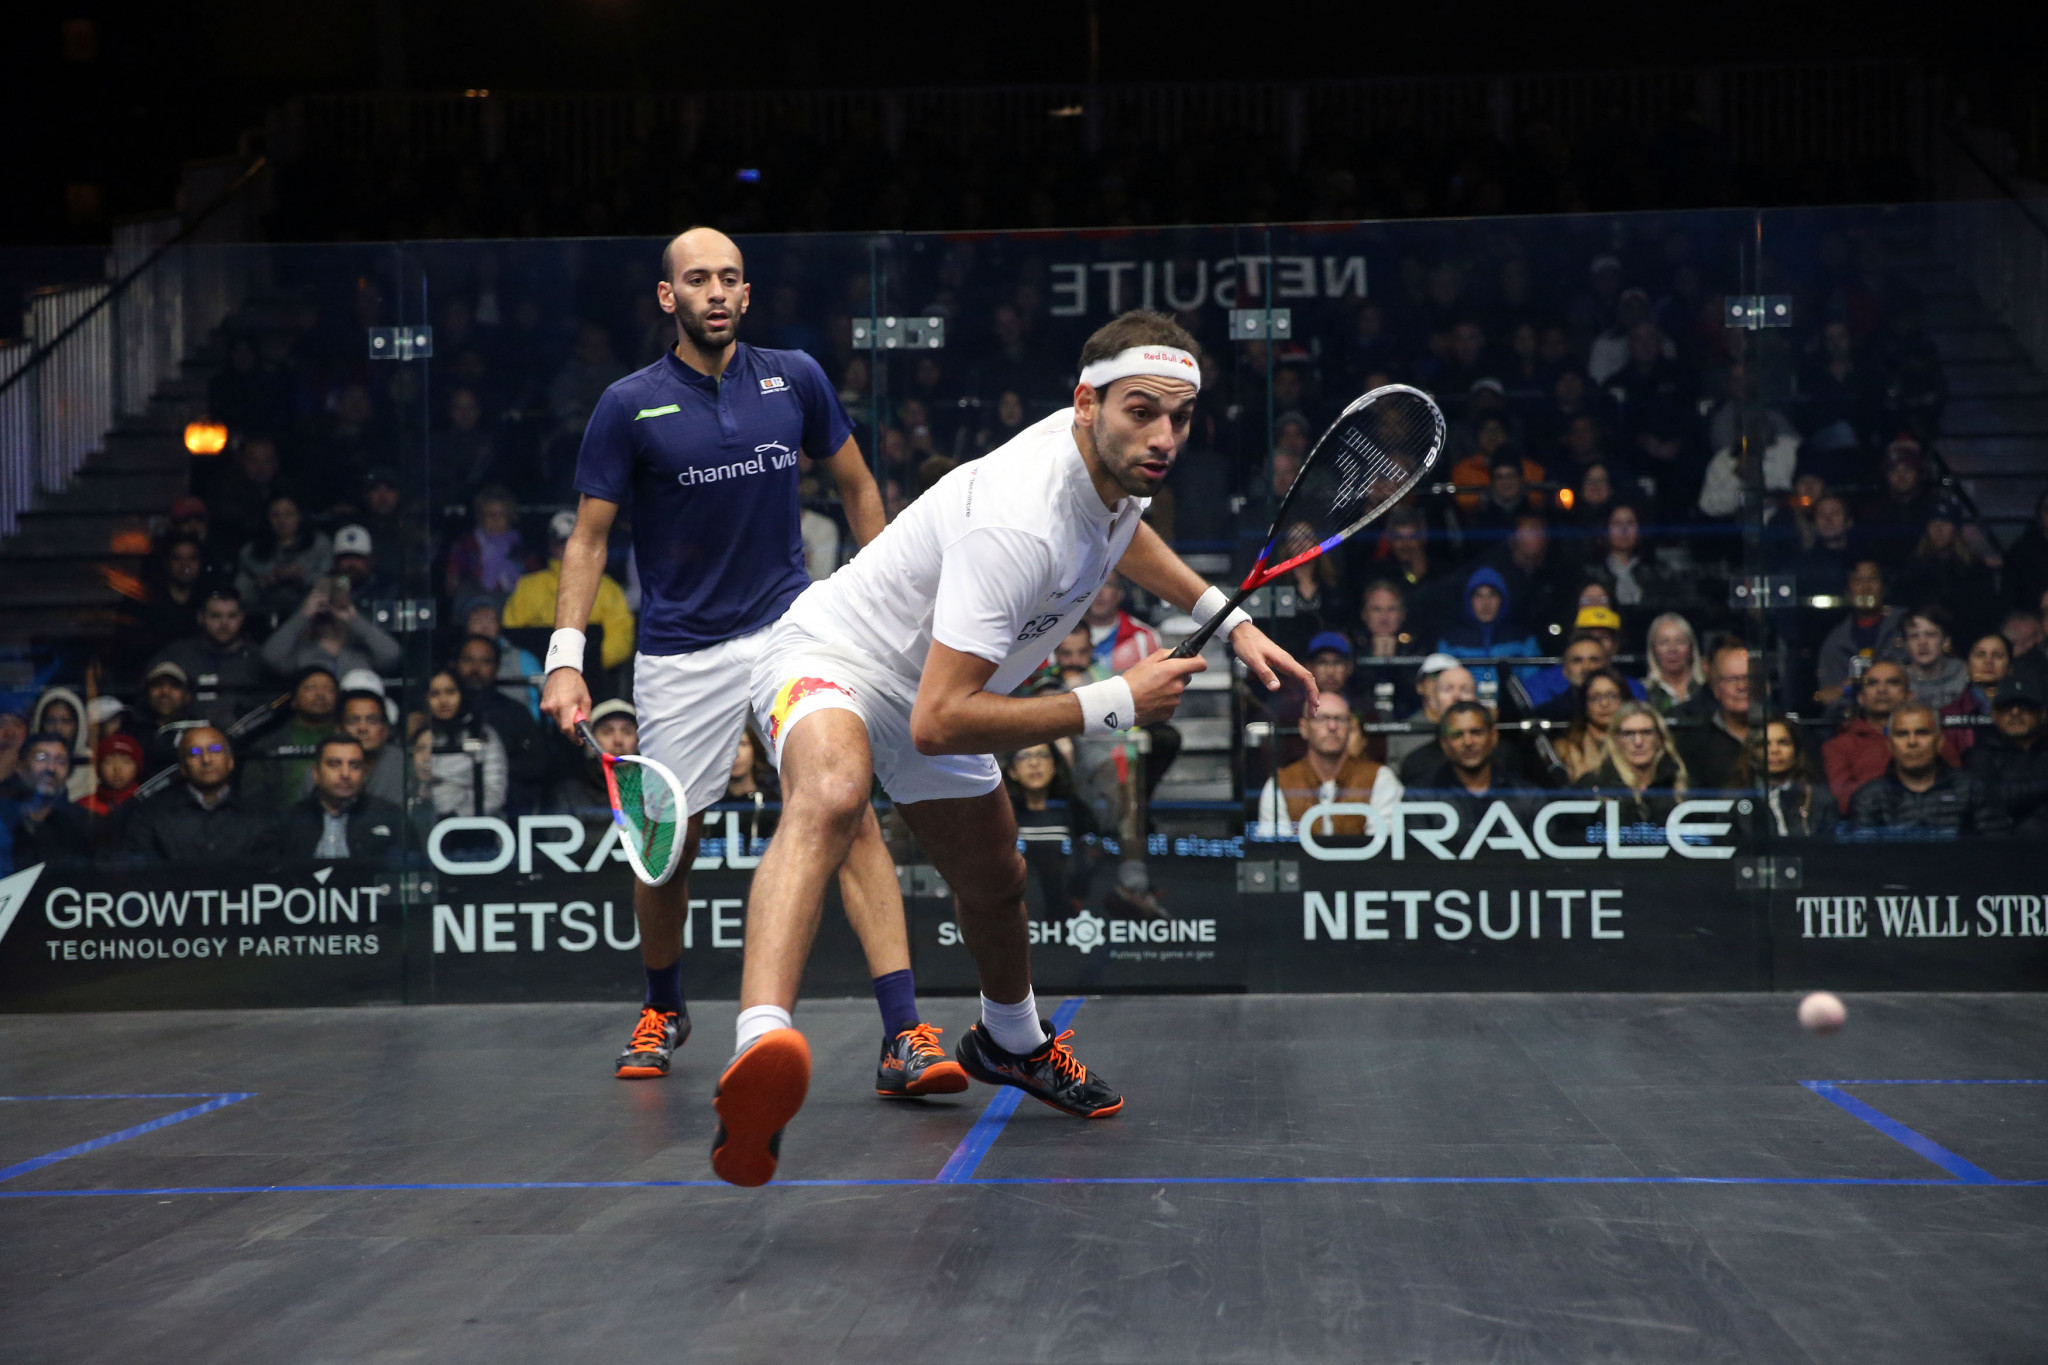 World number two Mohamed ElShorbagy was the victor against his younger brother Marwan in San Francisco ©PSA